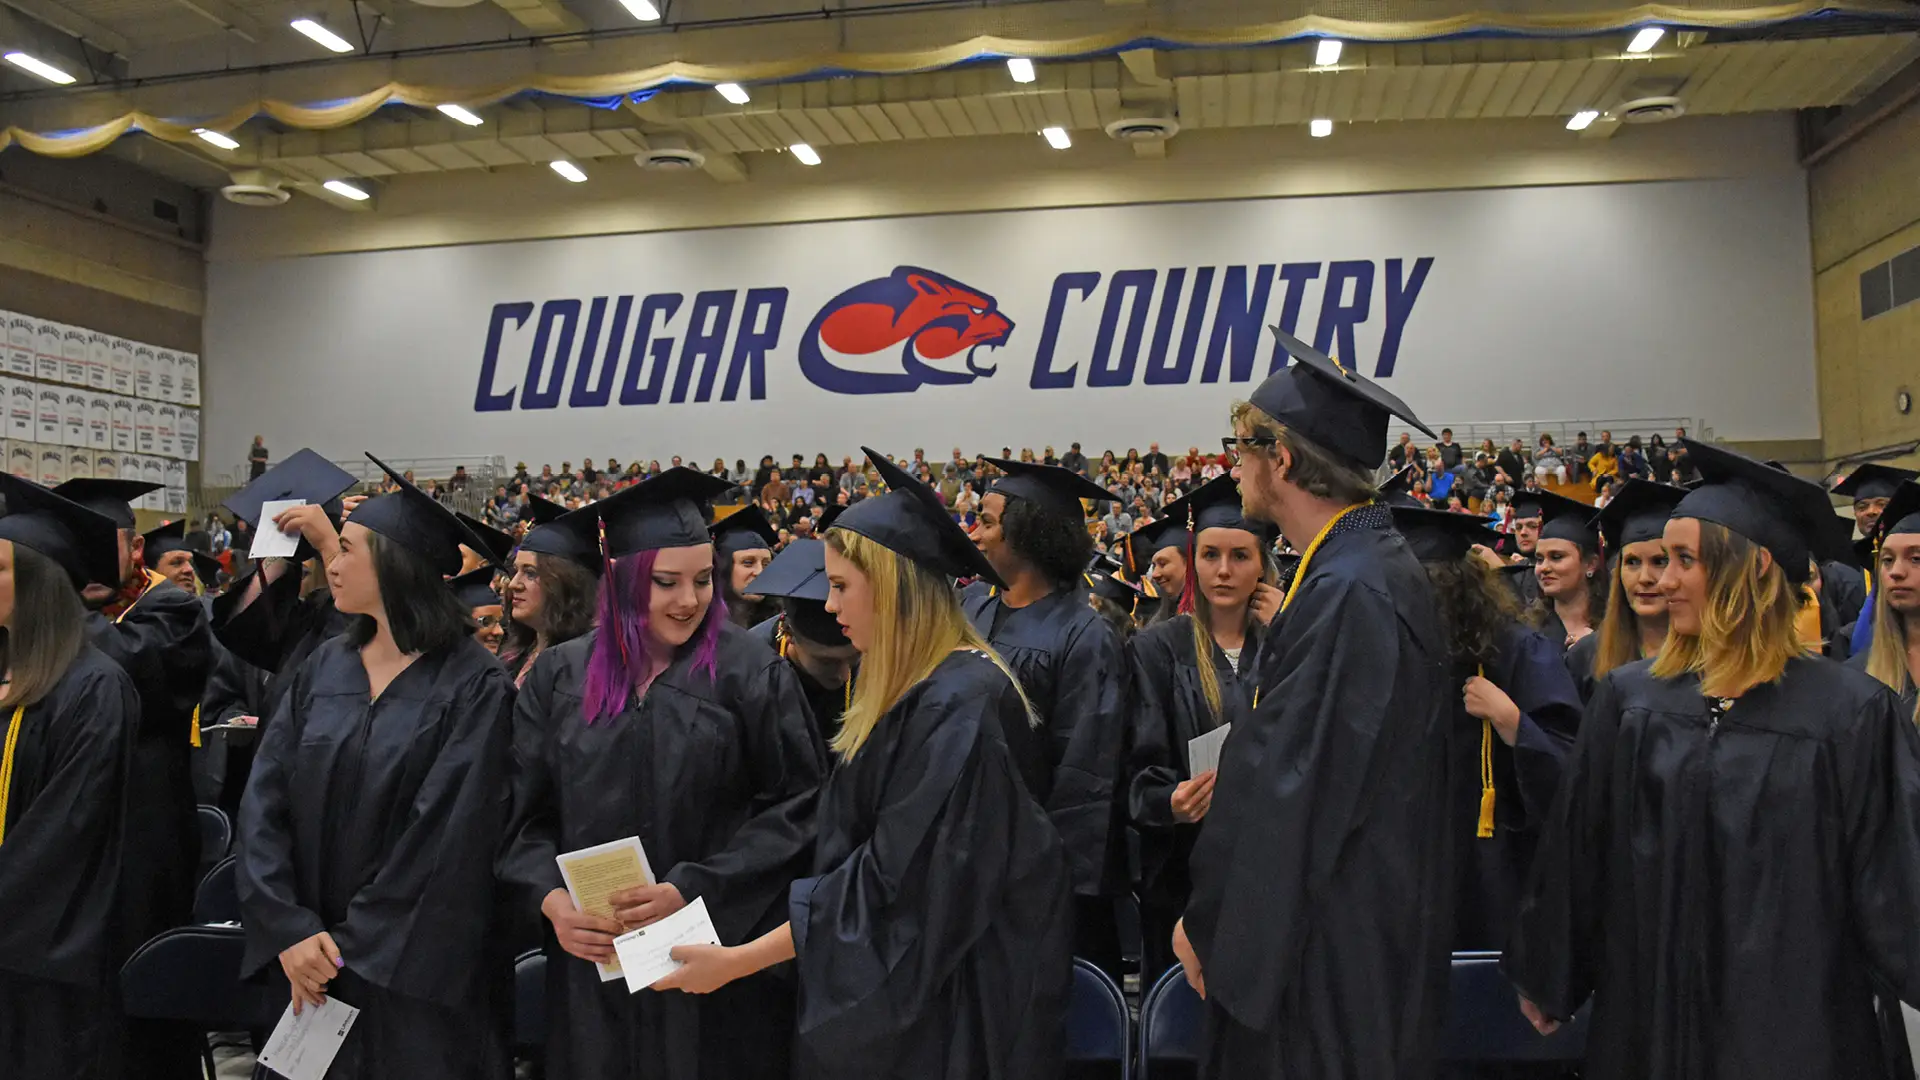 Zoom background of CCC graduates in the Randall gym with the Cougar Country banner in the background